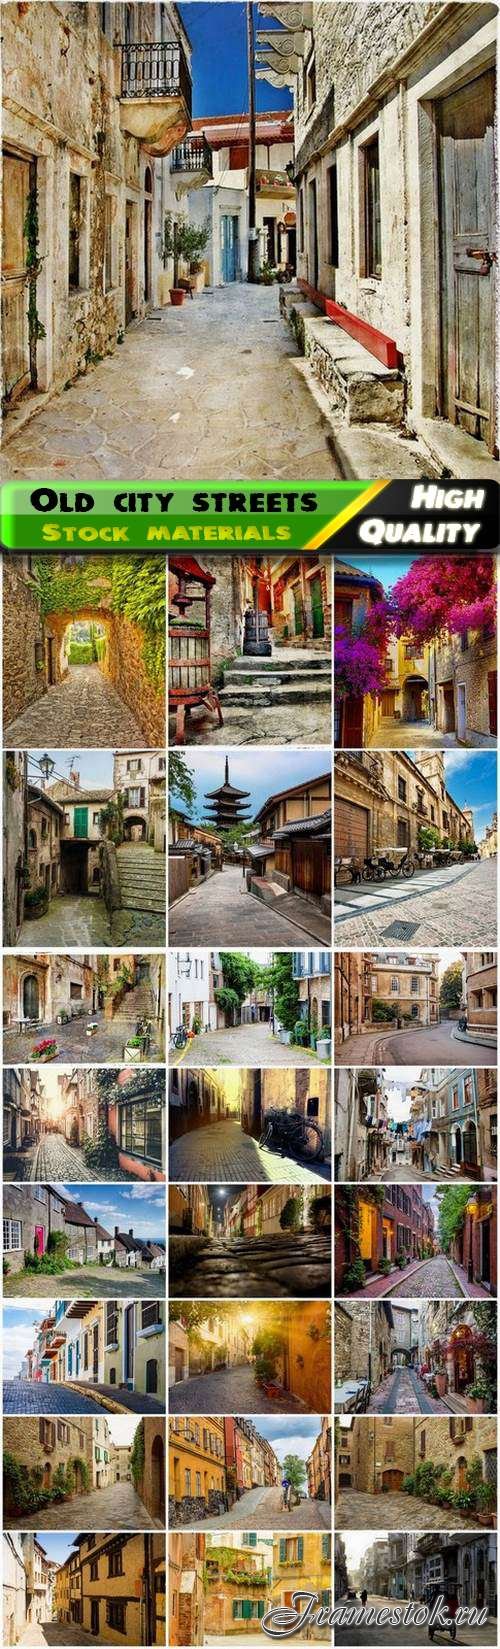 Retro architectural and old city streets - 25 HQ Jpg